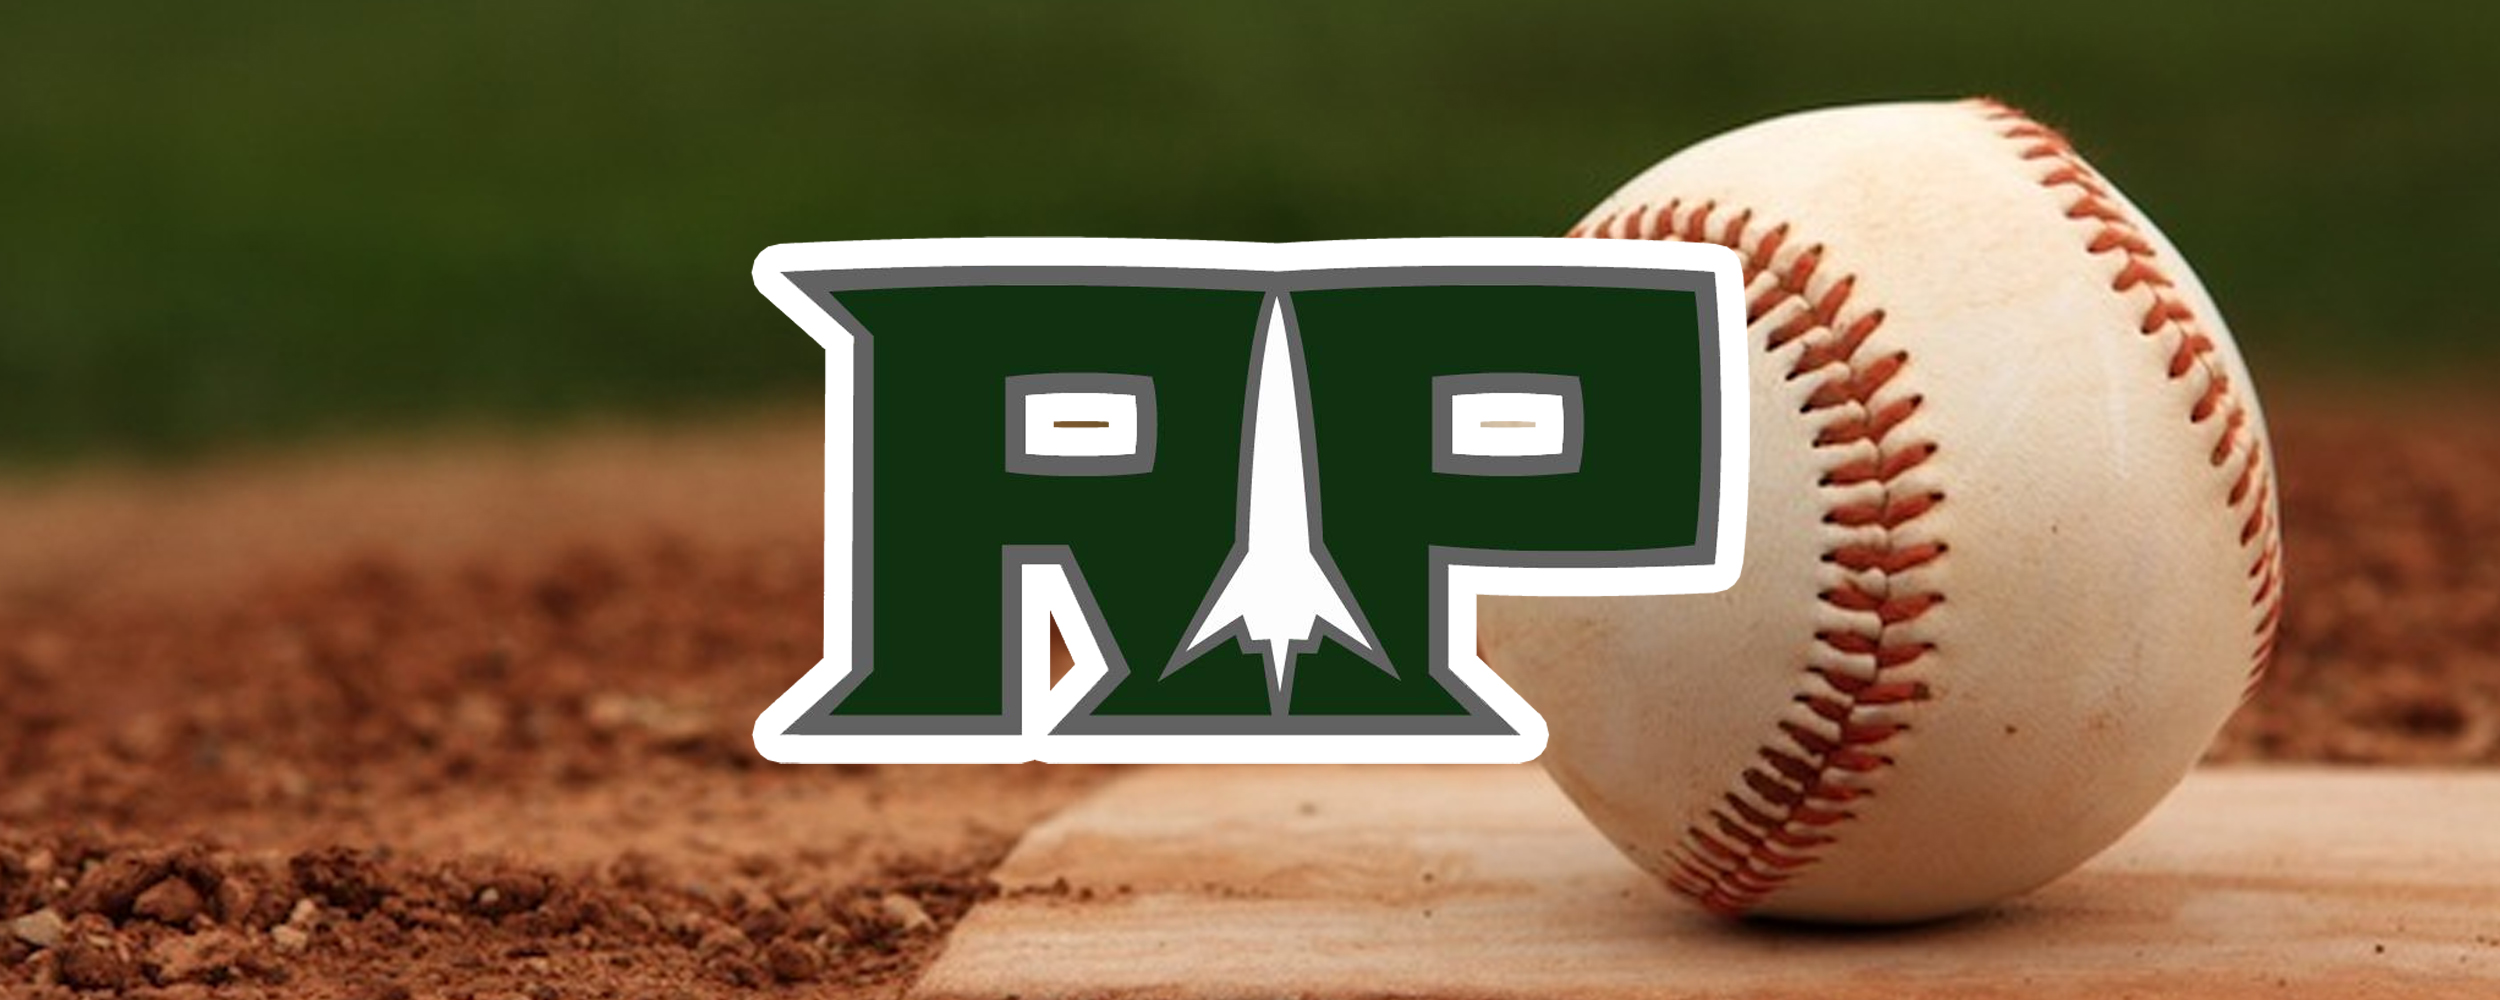 Reeths-Puffer pulls off late comeback win over Oakridge in non-conference baseball